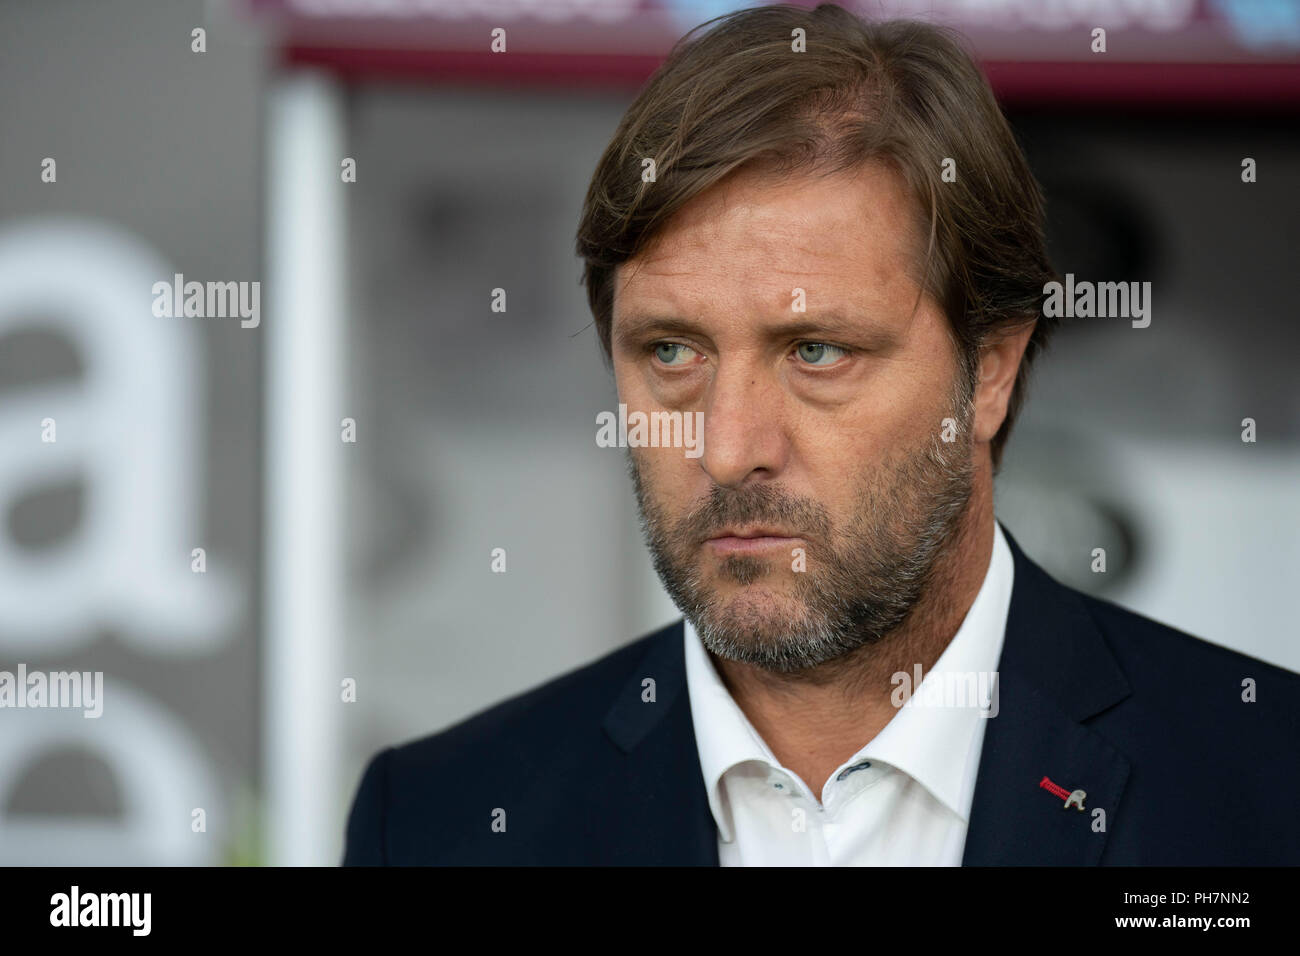 Burnley, UK. 30th August 2018. Olympiacos coach Pedro Martins  30th August 2018, Turf Moor, Burnley, England; UEFA Europa League, Play off leg 2 of 2, Burnley v Olympiacos FC Credit: Terry Donnelly/Alamy Live News Stock Photo